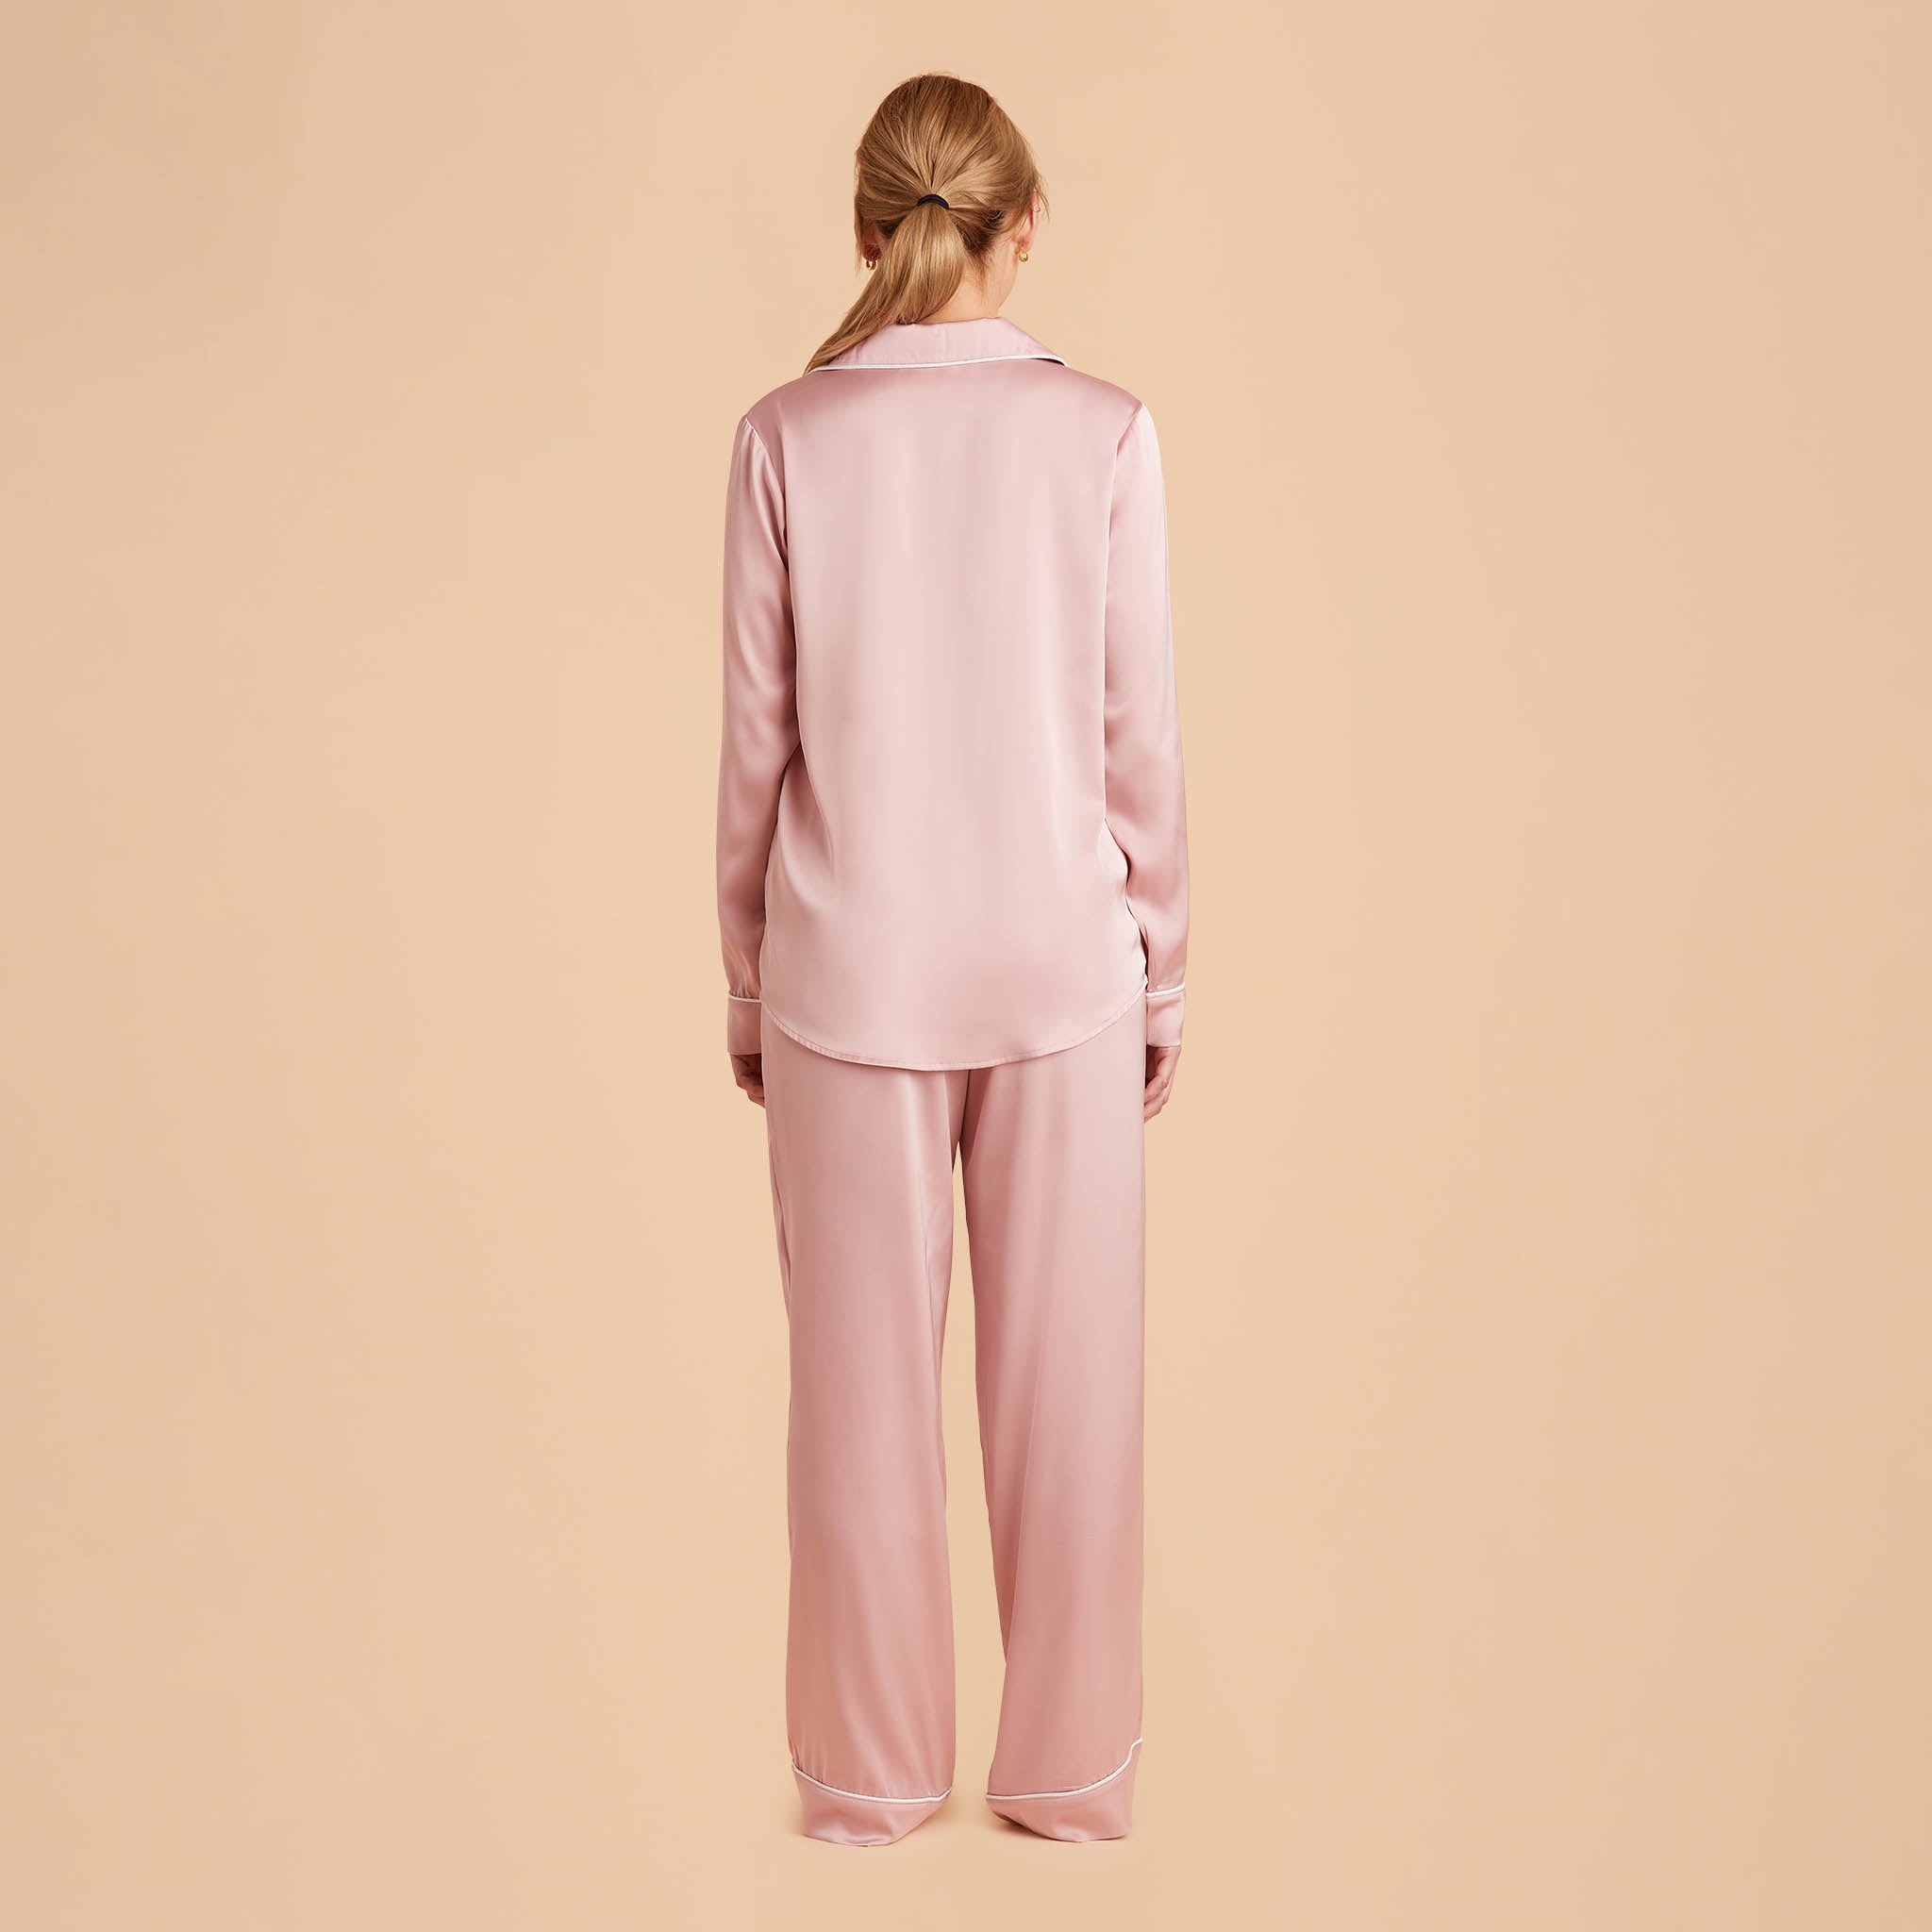 Jonny Satin Pants Bridesmaid Pajamas With White Piping in dusty pink, back view